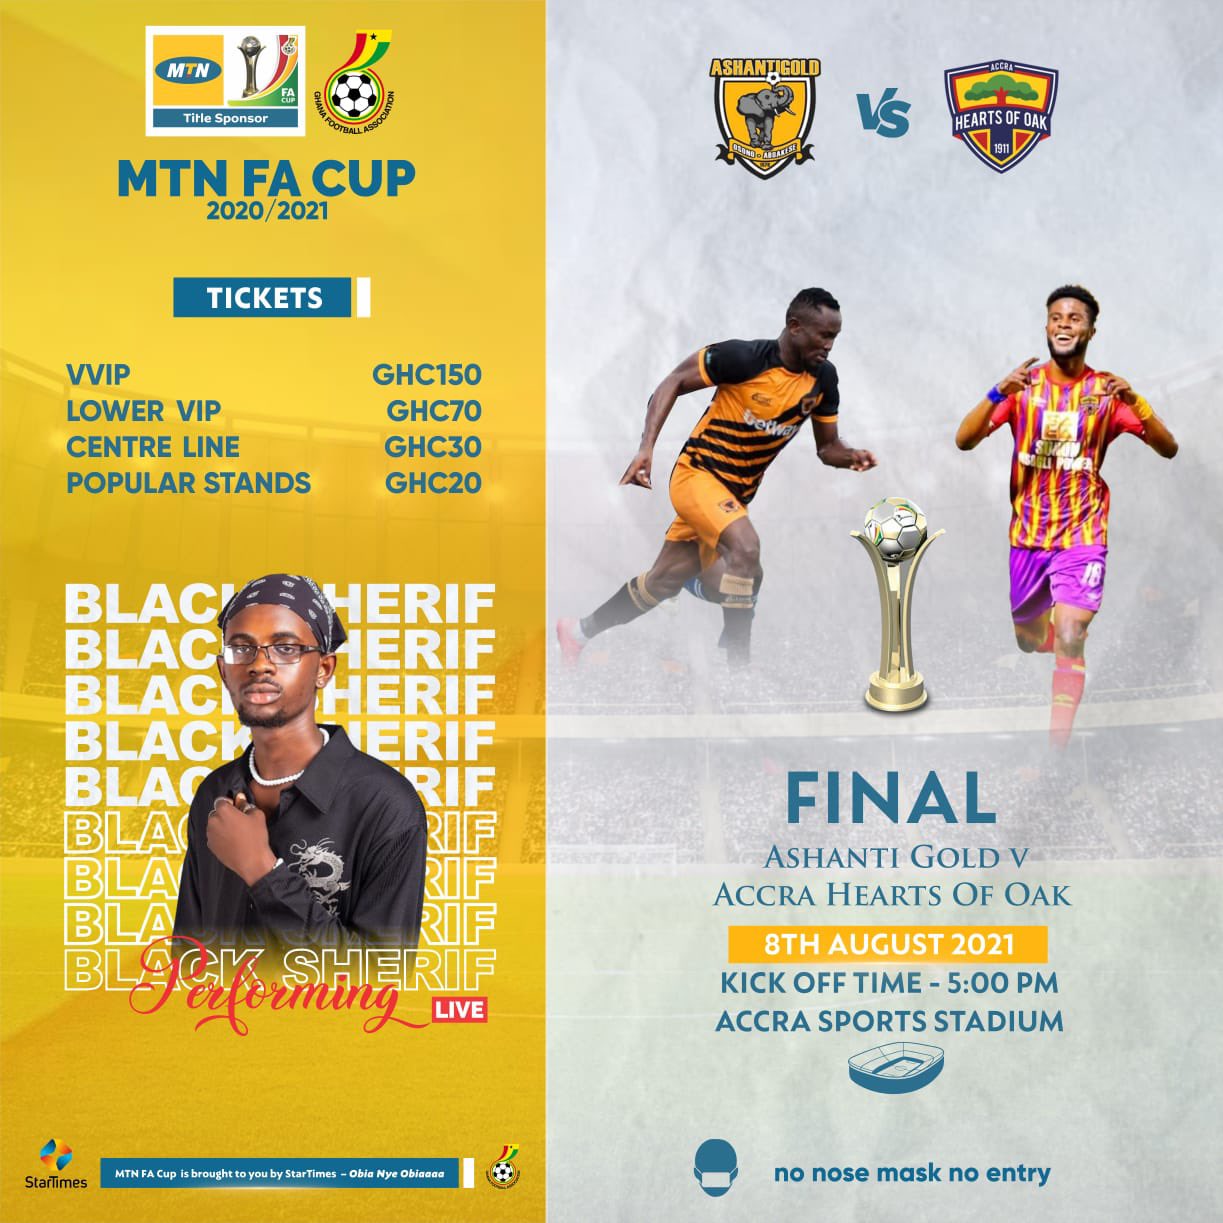 Ticket prices for MTN FA Cup final match announced